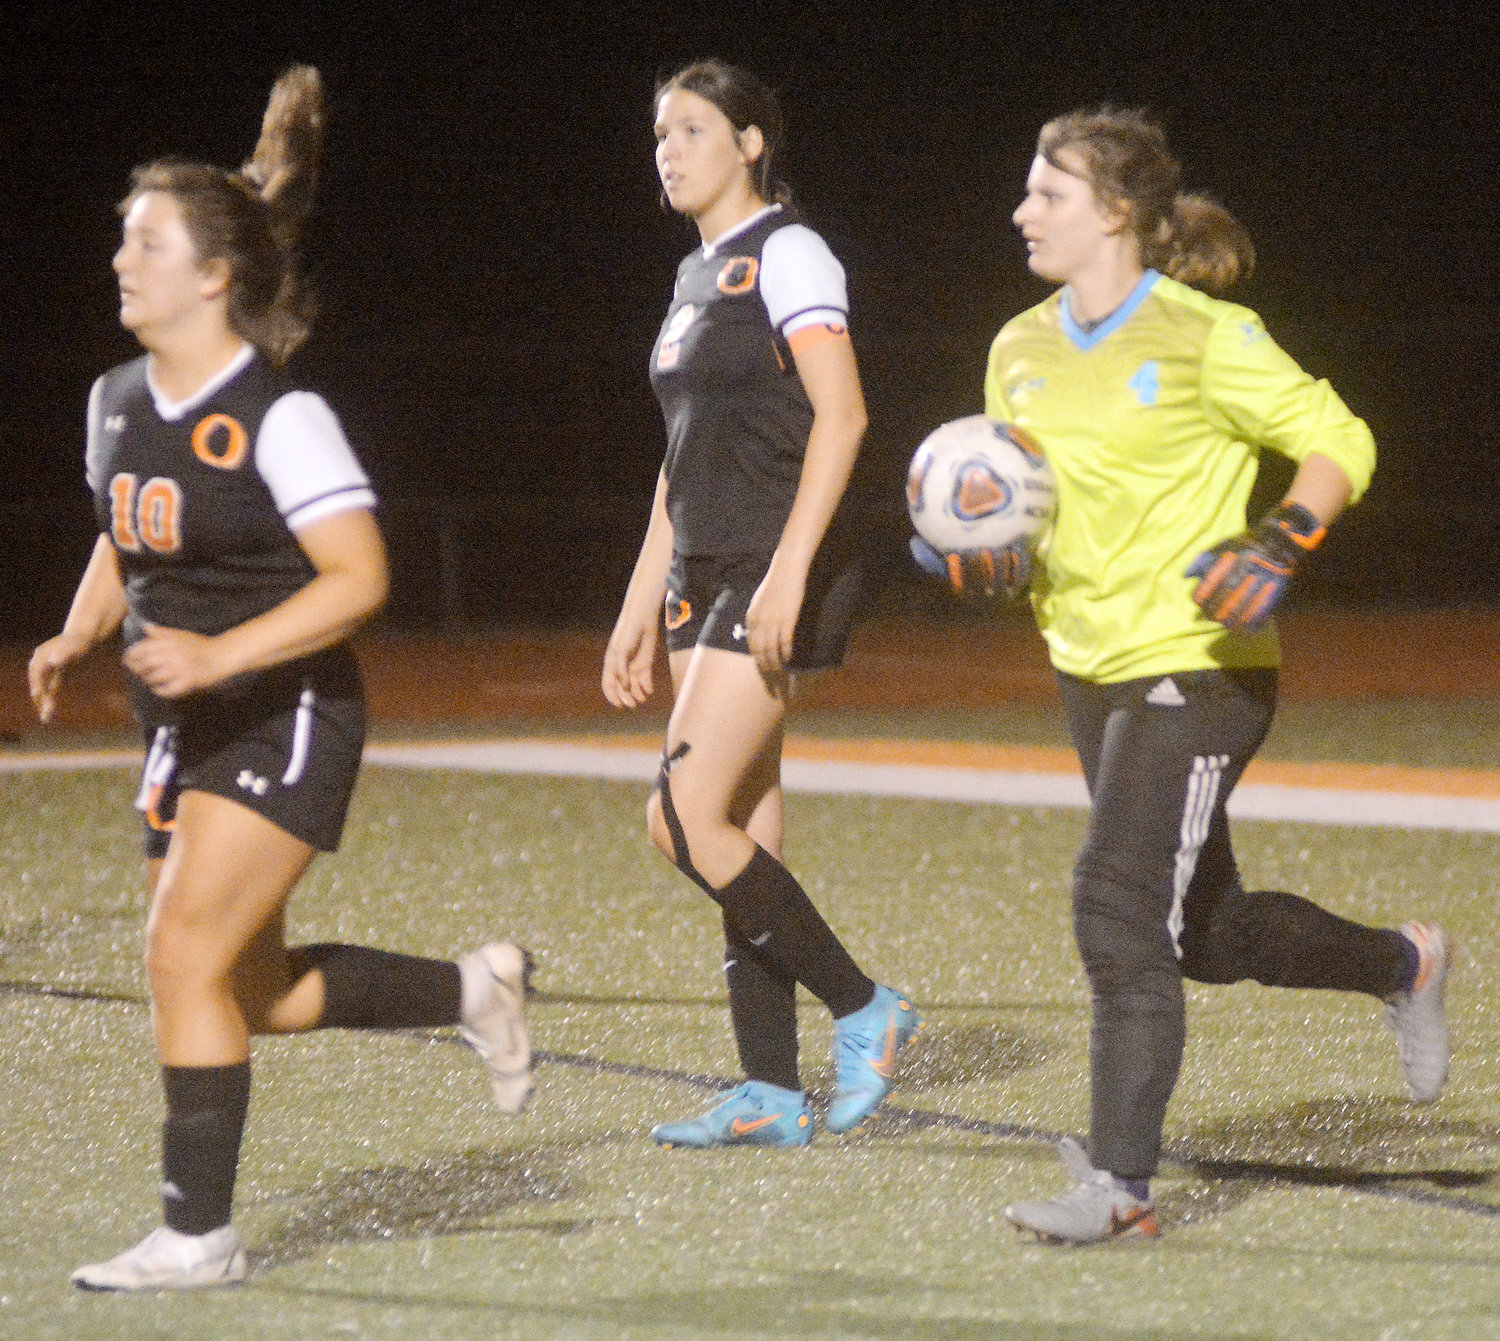 Paige Loyd (far right) prepares to kick the soccer ball down field in the Owensville Tournament championship match against Sullivan’s Lady Eagles.